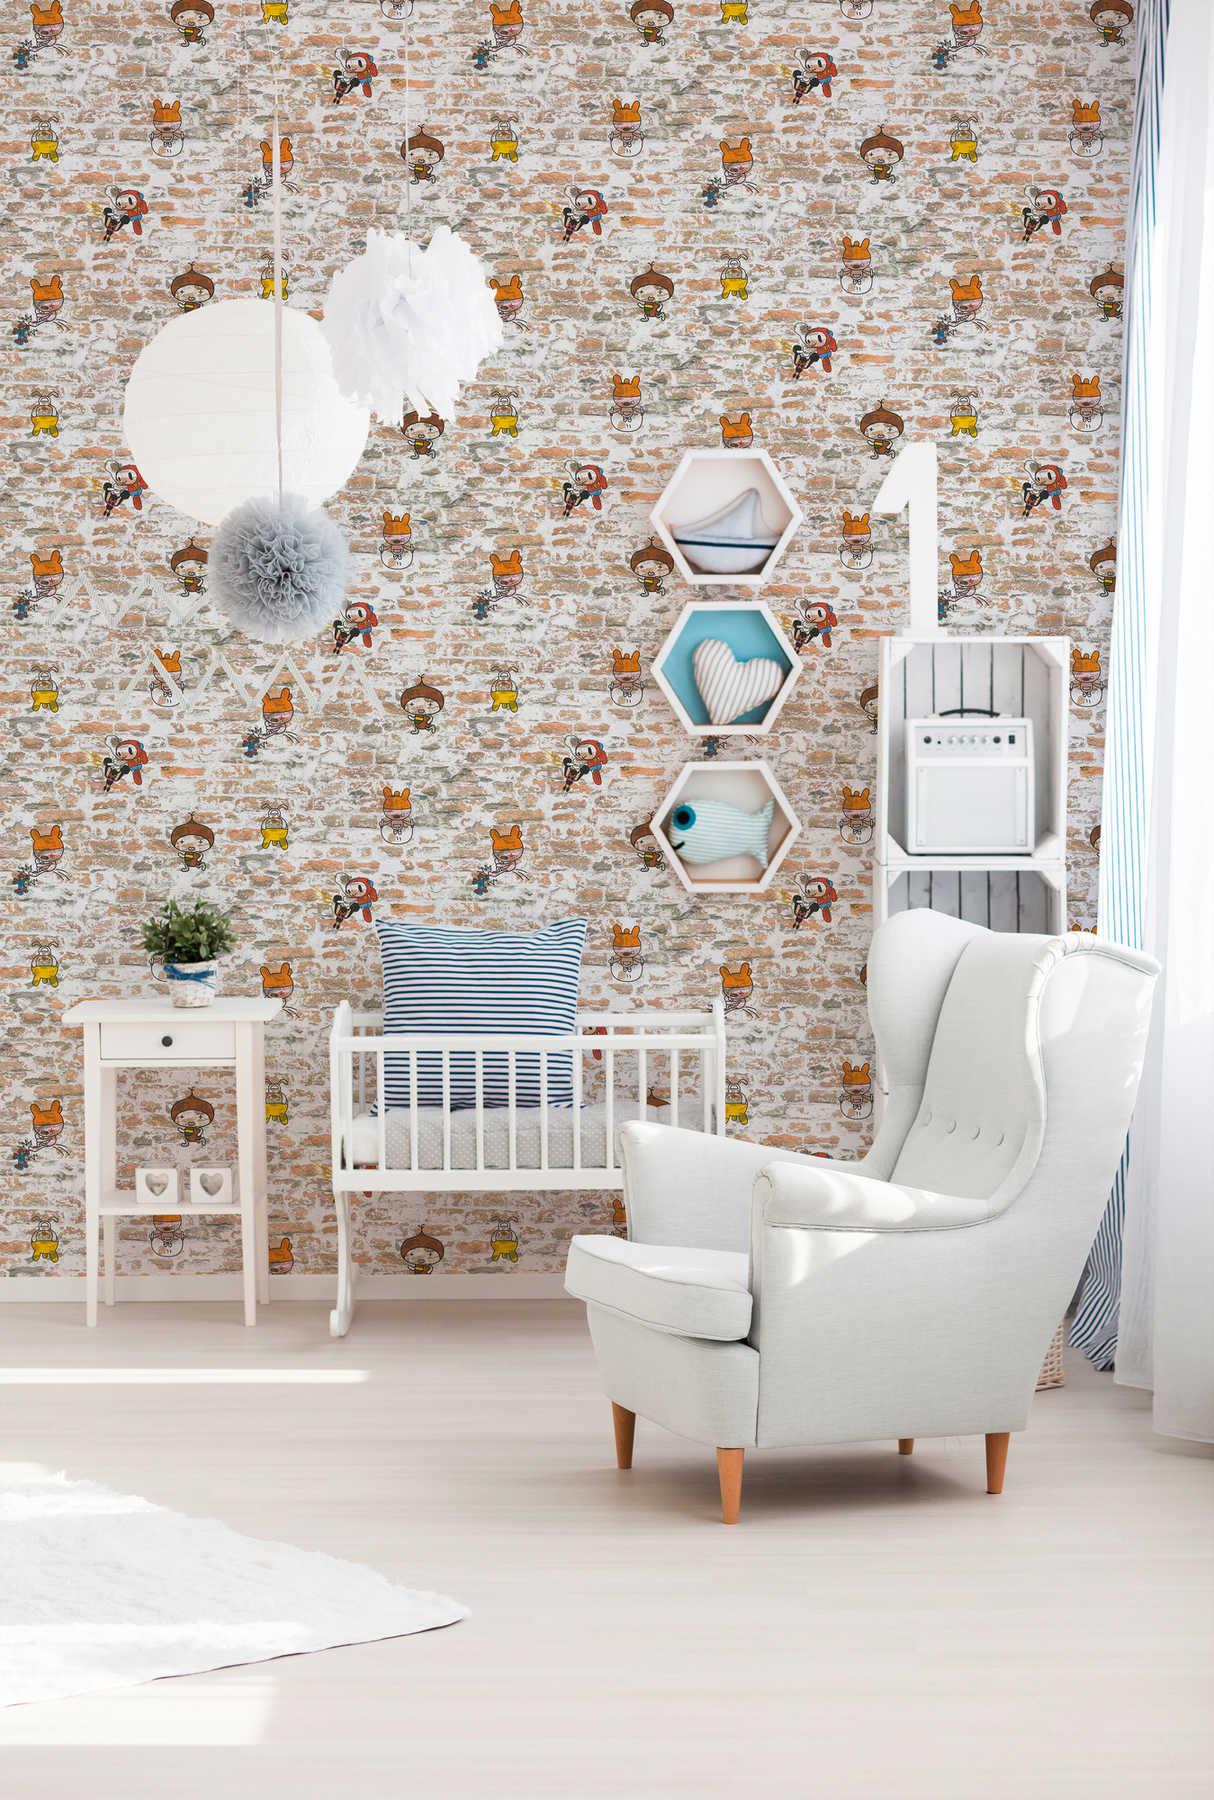             Paper wallpaper wall optics with cartoon characters - brown, beige
        